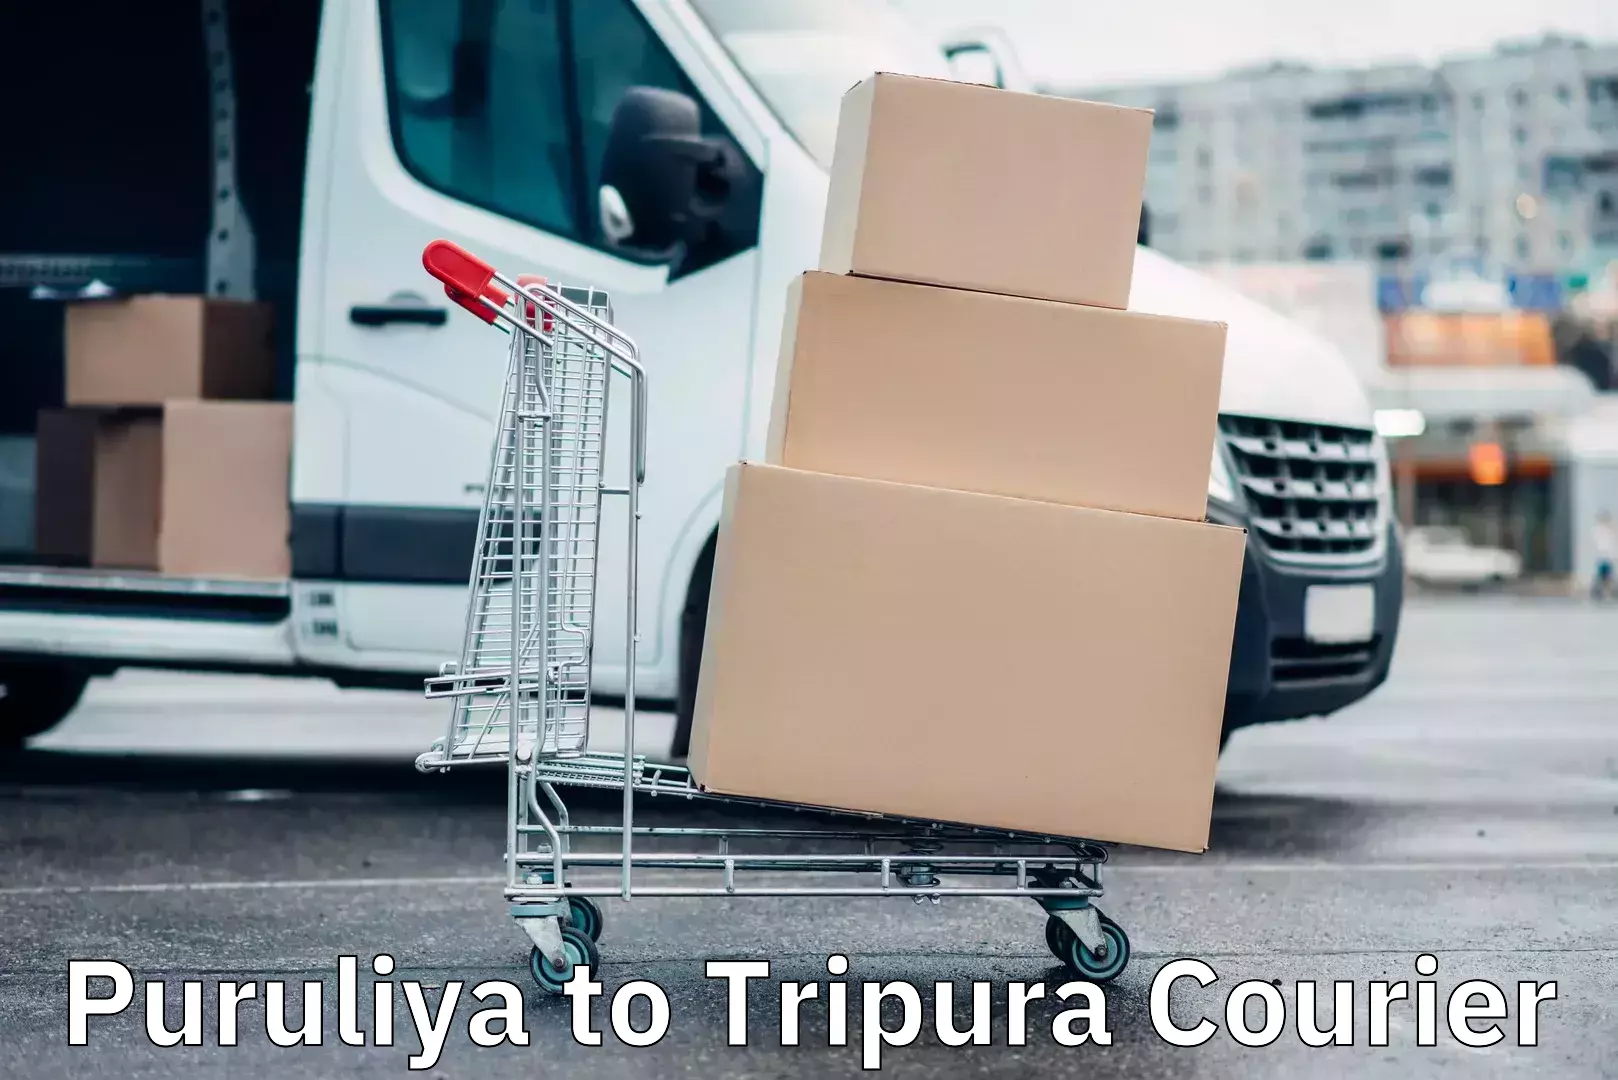 Full-service courier options Puruliya to Tripura